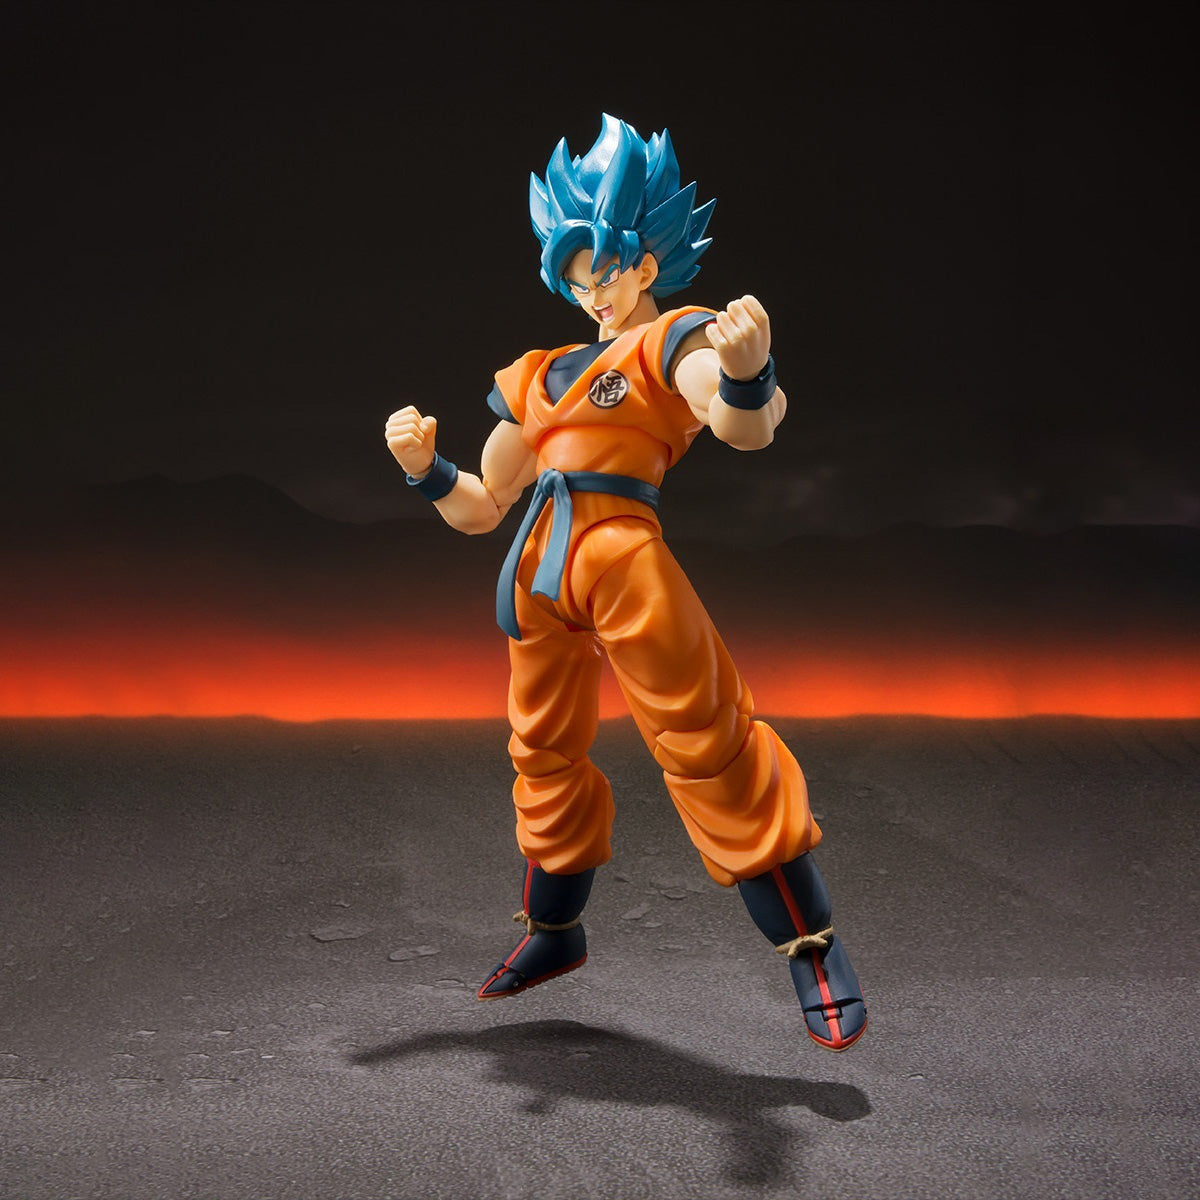 Bandai - S.H.Figuarts - Dragon Ball Super: Broly - Super Saiyan God Super Saiyan Son Goku -Super- (Reissue) (1/12 Scale) - Marvelous Toys